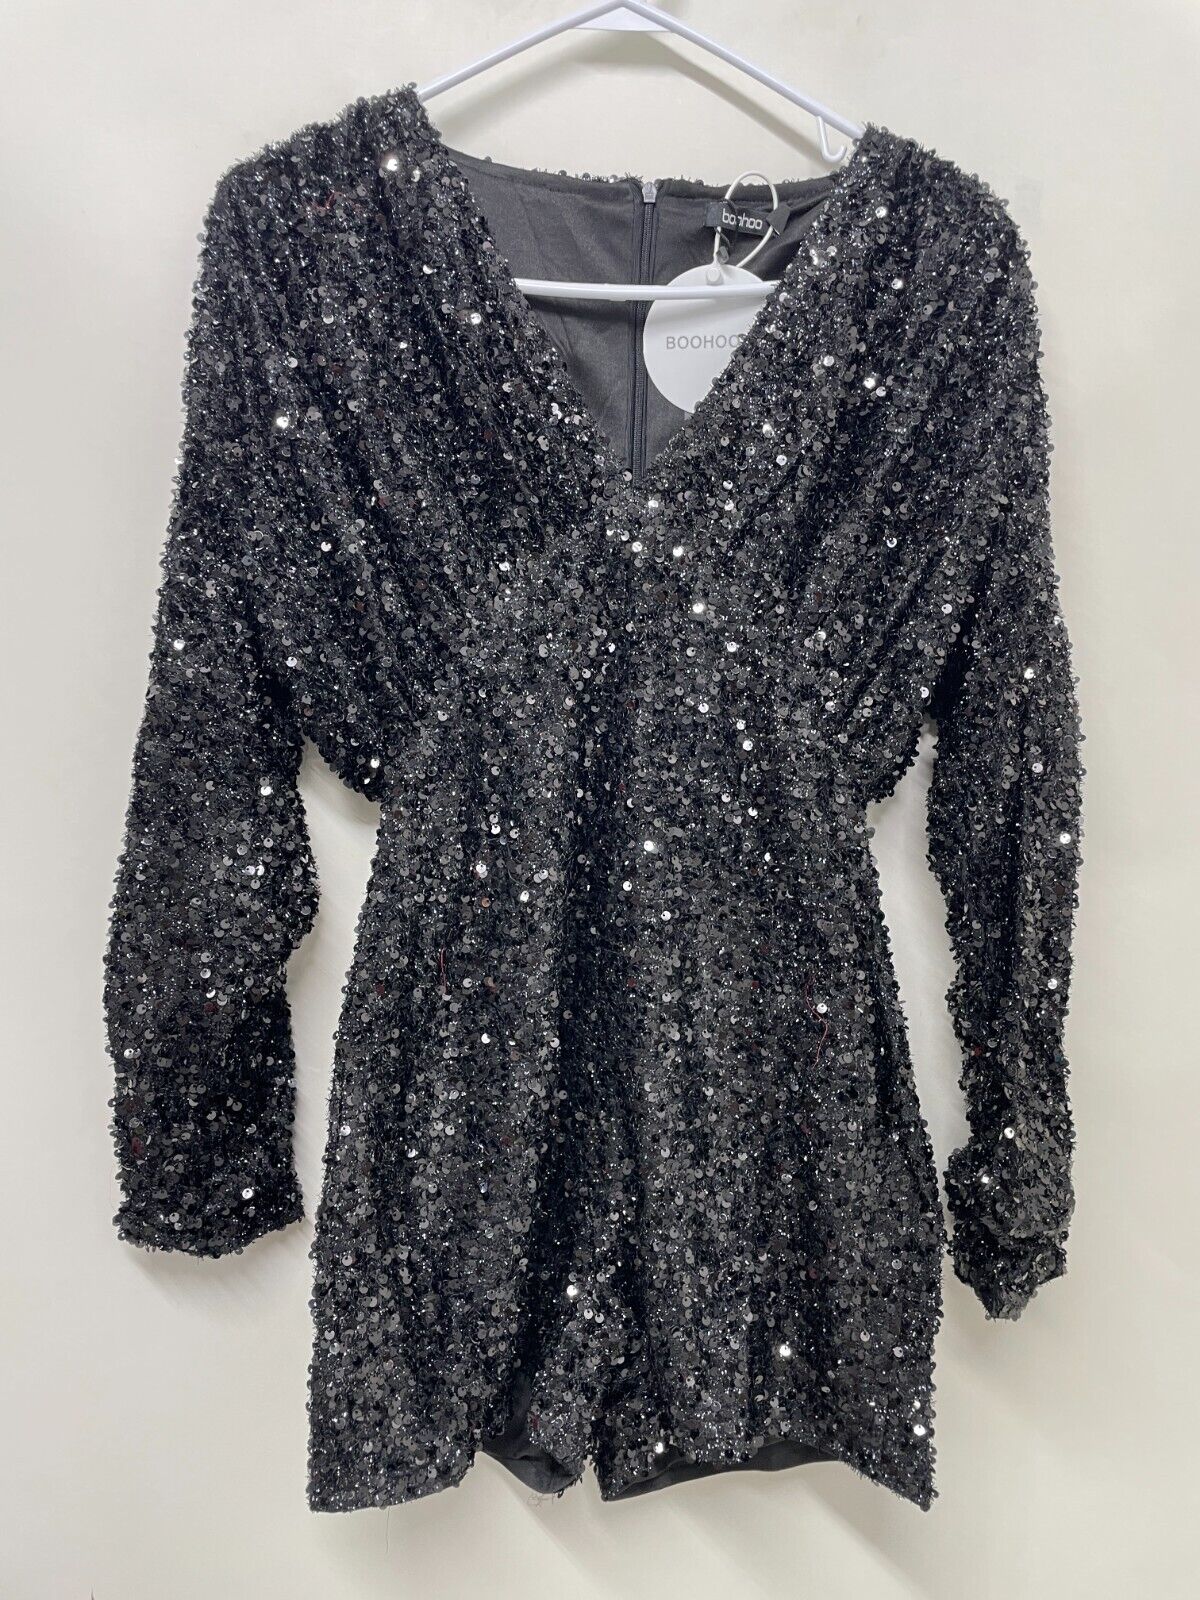 Boohoo Womens 10 Sequin Plunge Extreme Batwing Playsuit Romper Black FZZ33117